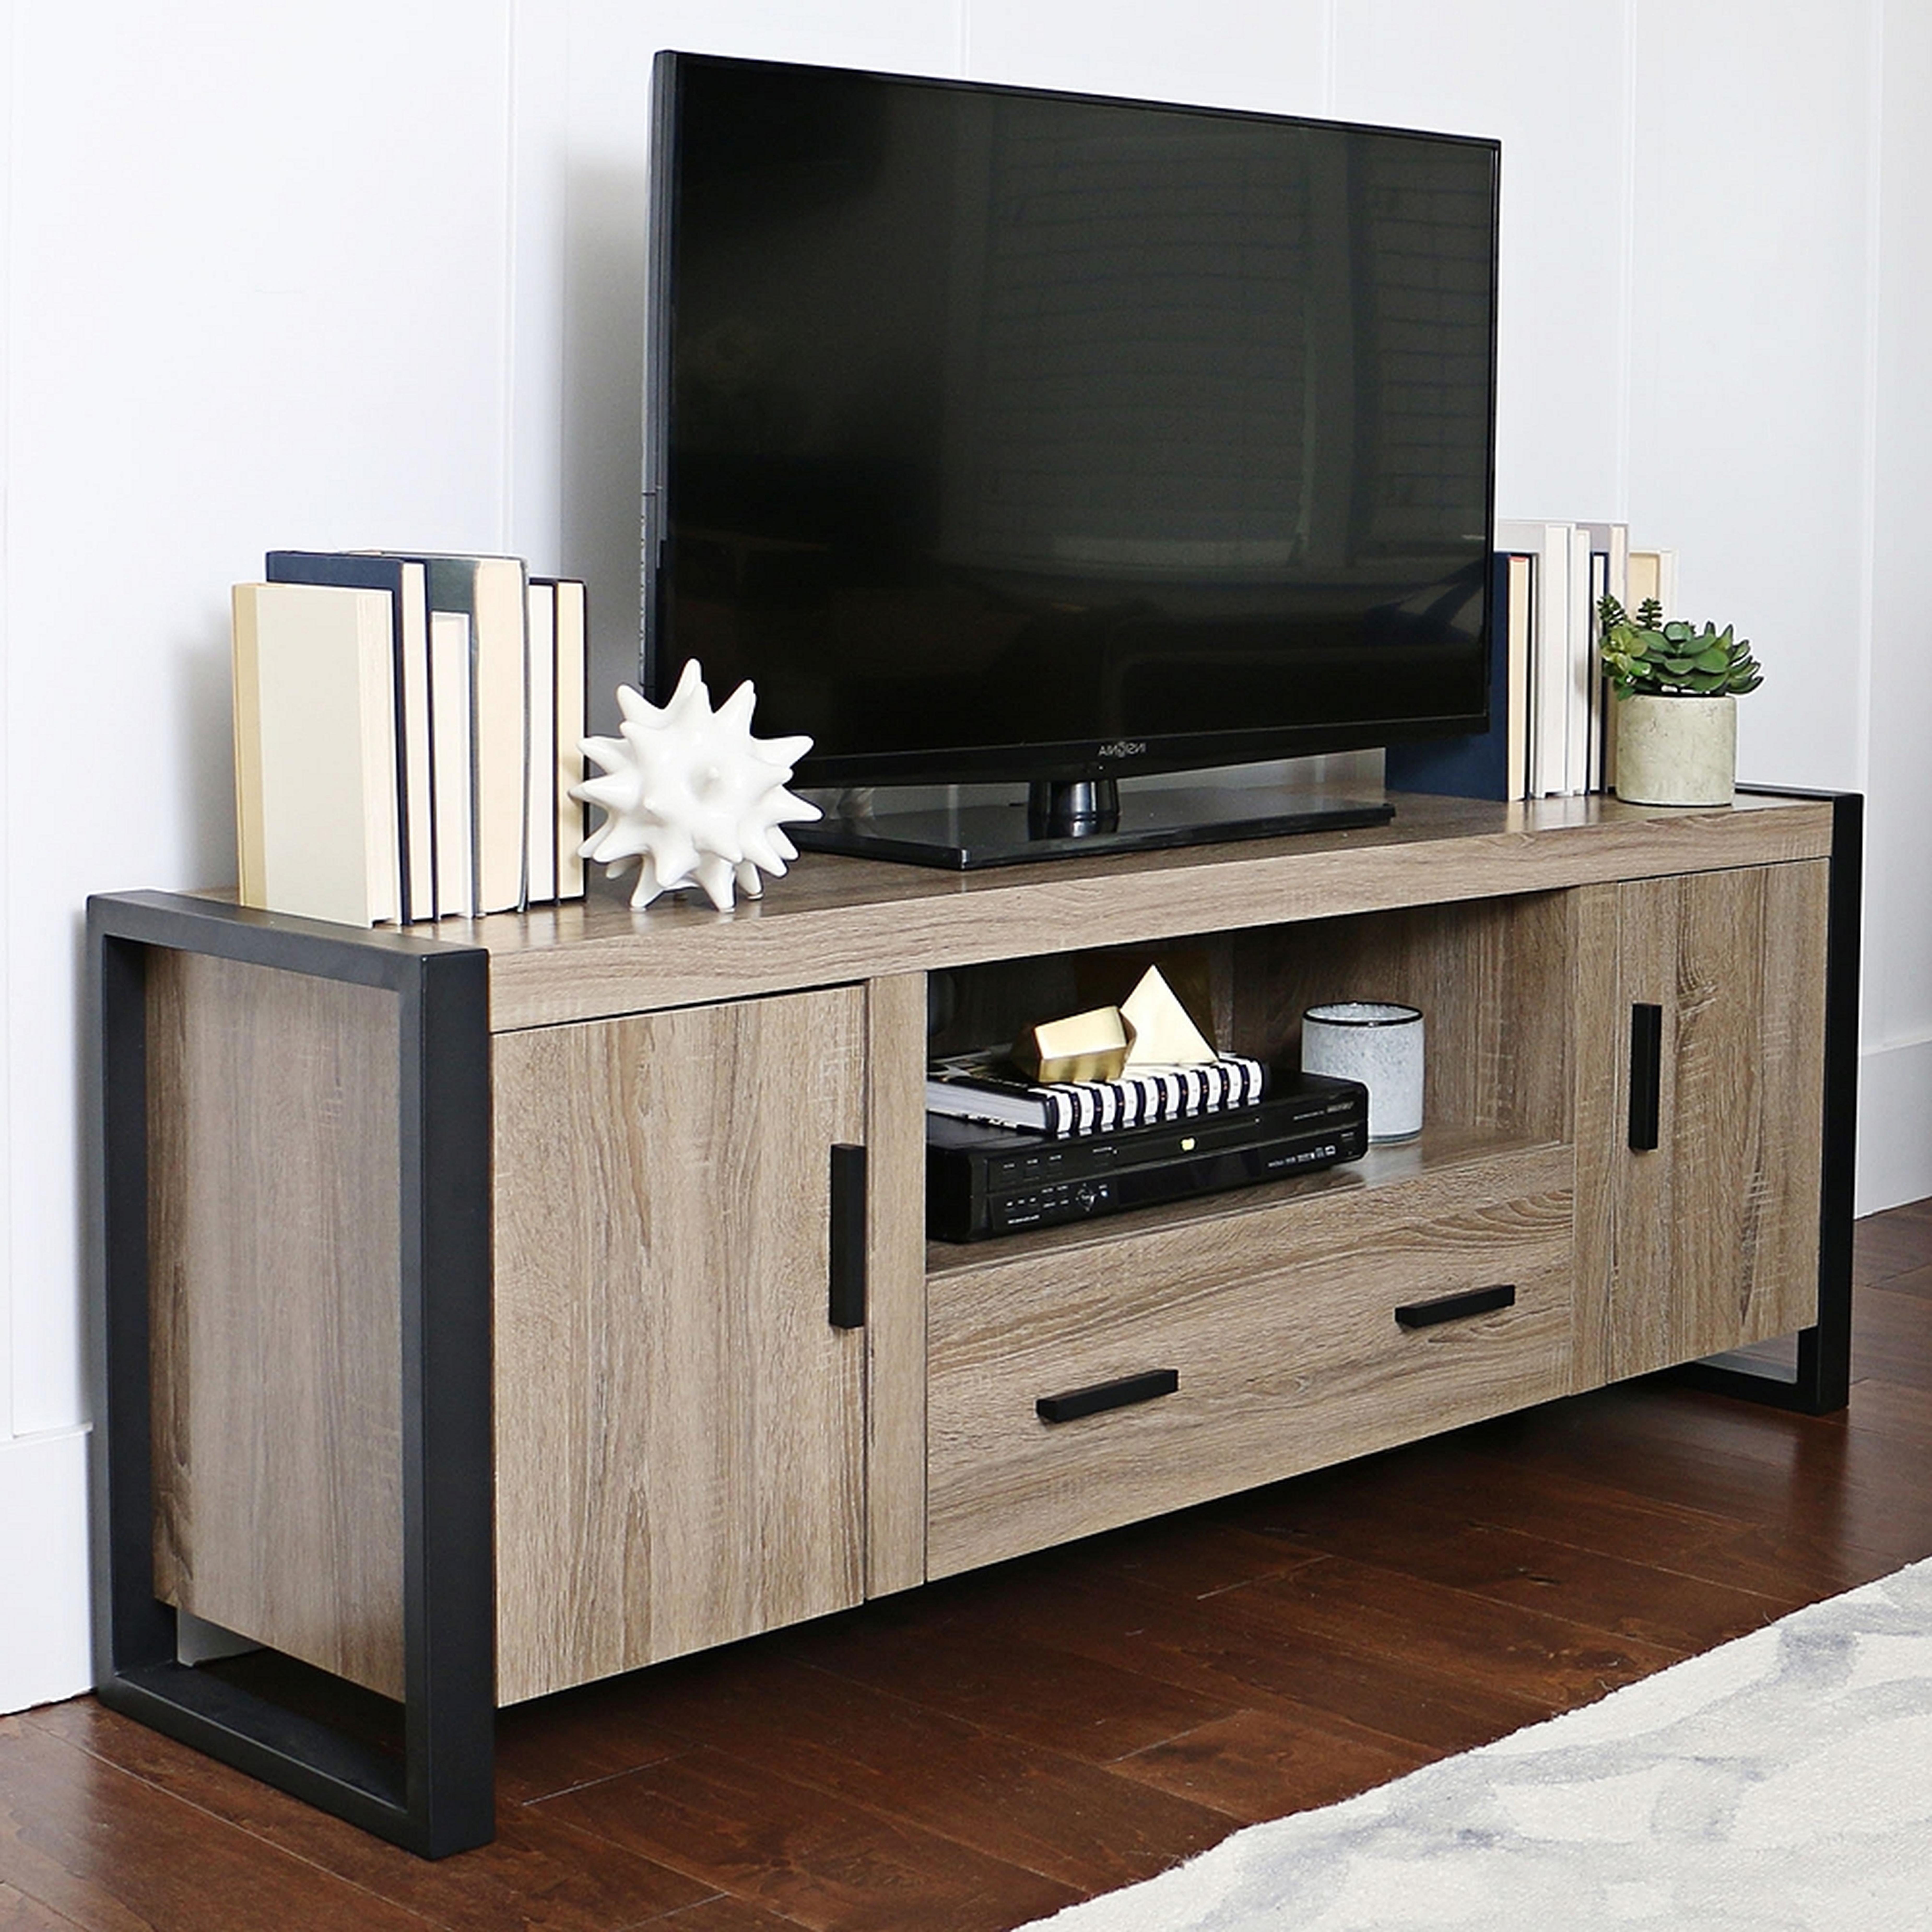 Urban Blend Driftwood 2-Drawer TV Stand Console - Style # 1W403 - Lamps Plus